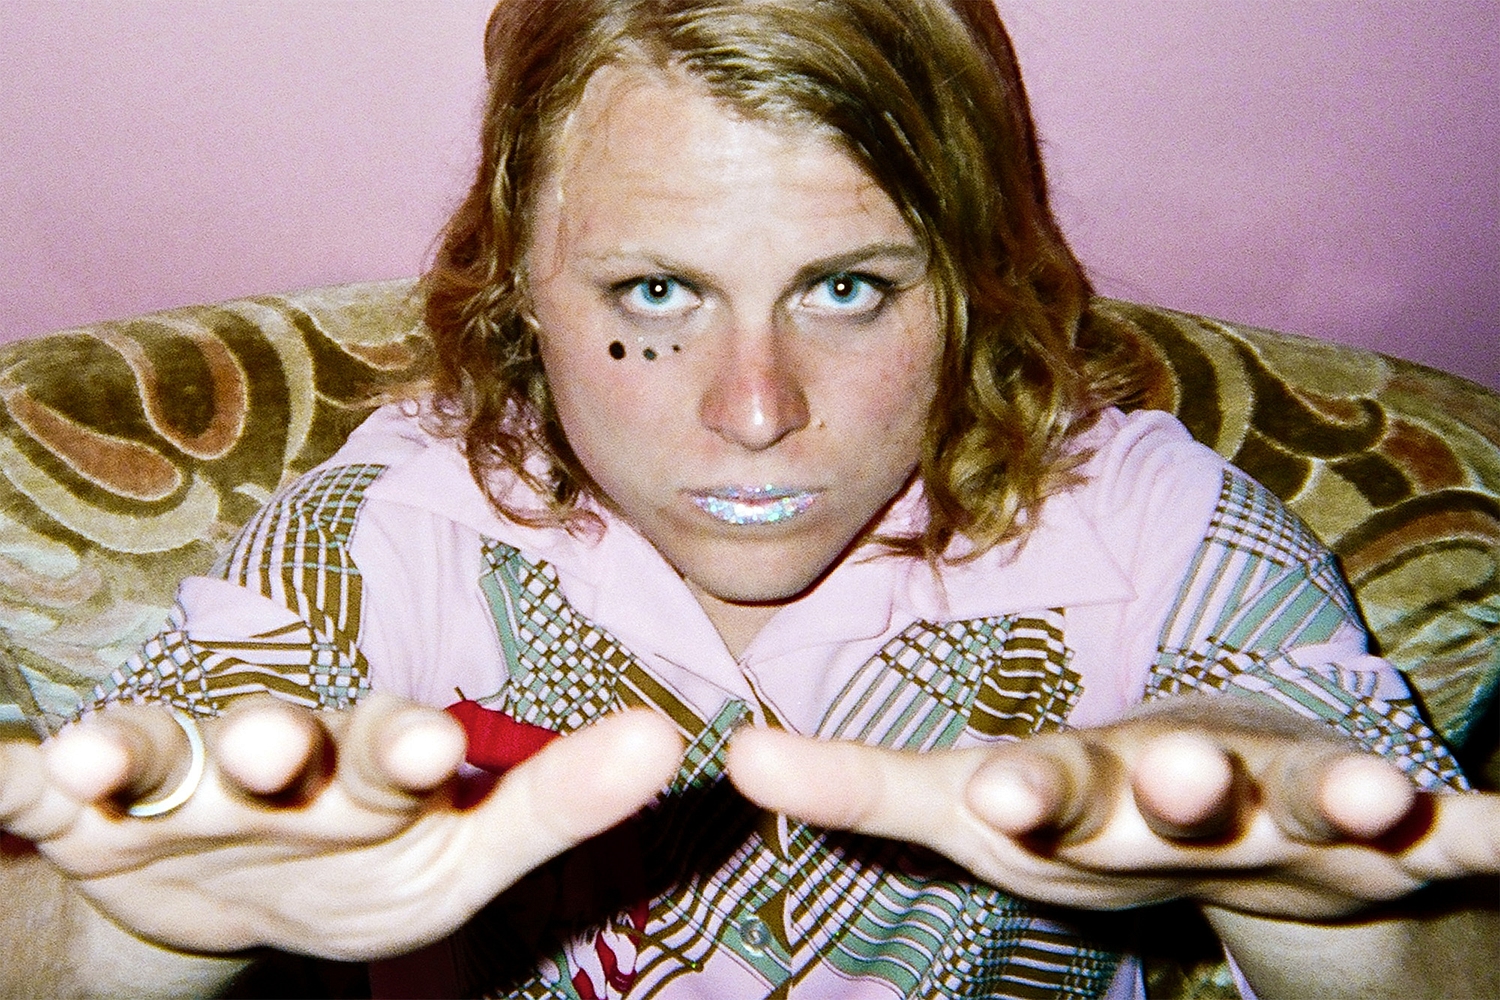 So You Think You Know… Ty Segall